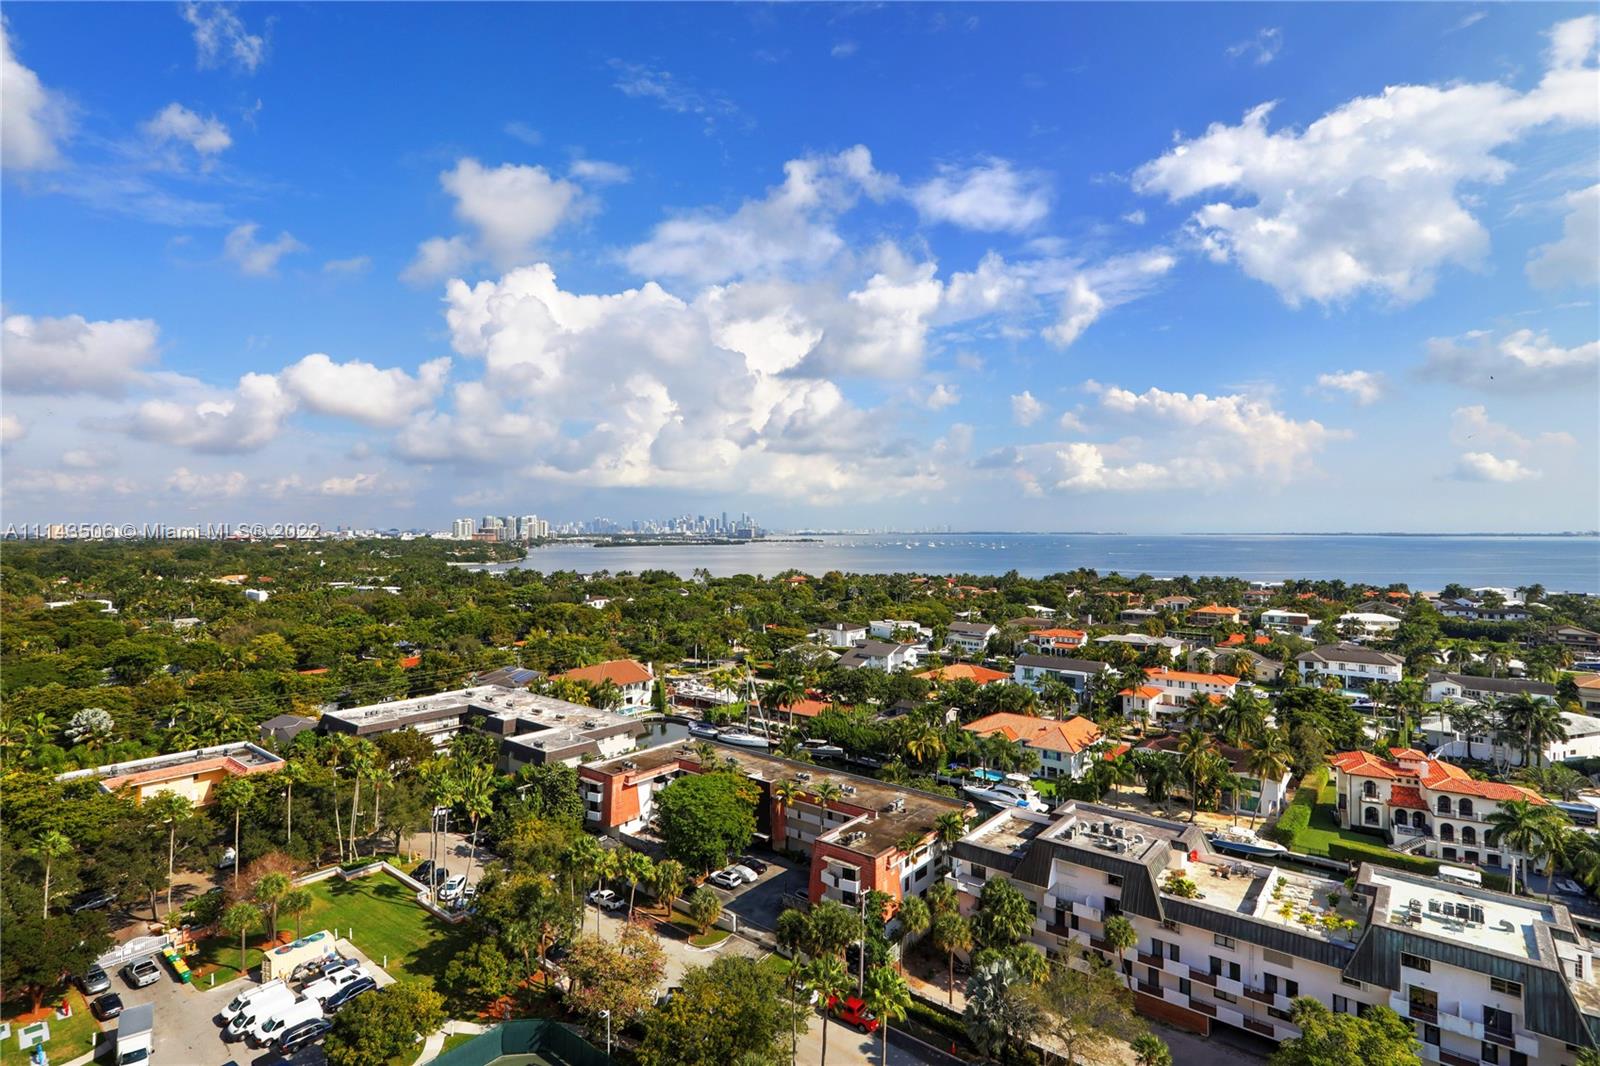 THIS RESIDENCE DESIGNED BY HOLMES NEWMAN FEATURES THE FINEST LUXURY FINISHING'S.  THIS CONDO BOASTS MORE THAN 4,000 SF OF LIVING SPACE PLUS AN ADDITIONAL 1,000 SF OF TERRACES. DIRECT OCEAN & SKYLINE VIEWS FROM THE ENTIRE SOUTHEAST CORNER OF THE BUILDING. ENJOY MESMERIZING WATER VIEWS, AS WELL AS THE TWINKLING LIGHTS OF CORAL GABLES, COCONUT GROVE, KEY BISCAYNE & DOWNTOWN CITY VIEWS FROM THIS MOST SOUGHT AFTER LINE IN THE GABLES CLUB "A LINE" THE HOME FEATURES 3 BEDS, FAMILY ROOM/OFFICE, AMPLE ENTERTAINING SPACES, SEVERAL SITTING AREAS, CUSTOM GOURMET-STYLE EAT IN KITCHEN W TOP TIER APPLIANCES/CABINETRY, FABULOUS FLOORPLAN, HUGE SPACES, 5 STAR AMENITIES, HERE A JUST A FEW: LIGHTED TENNIS COURT, 24-HOUR SECURITY, RESTAURANT & ROOM SERVICE, FITNESS CENTER, SPA, LAP POOL, & MARINA.